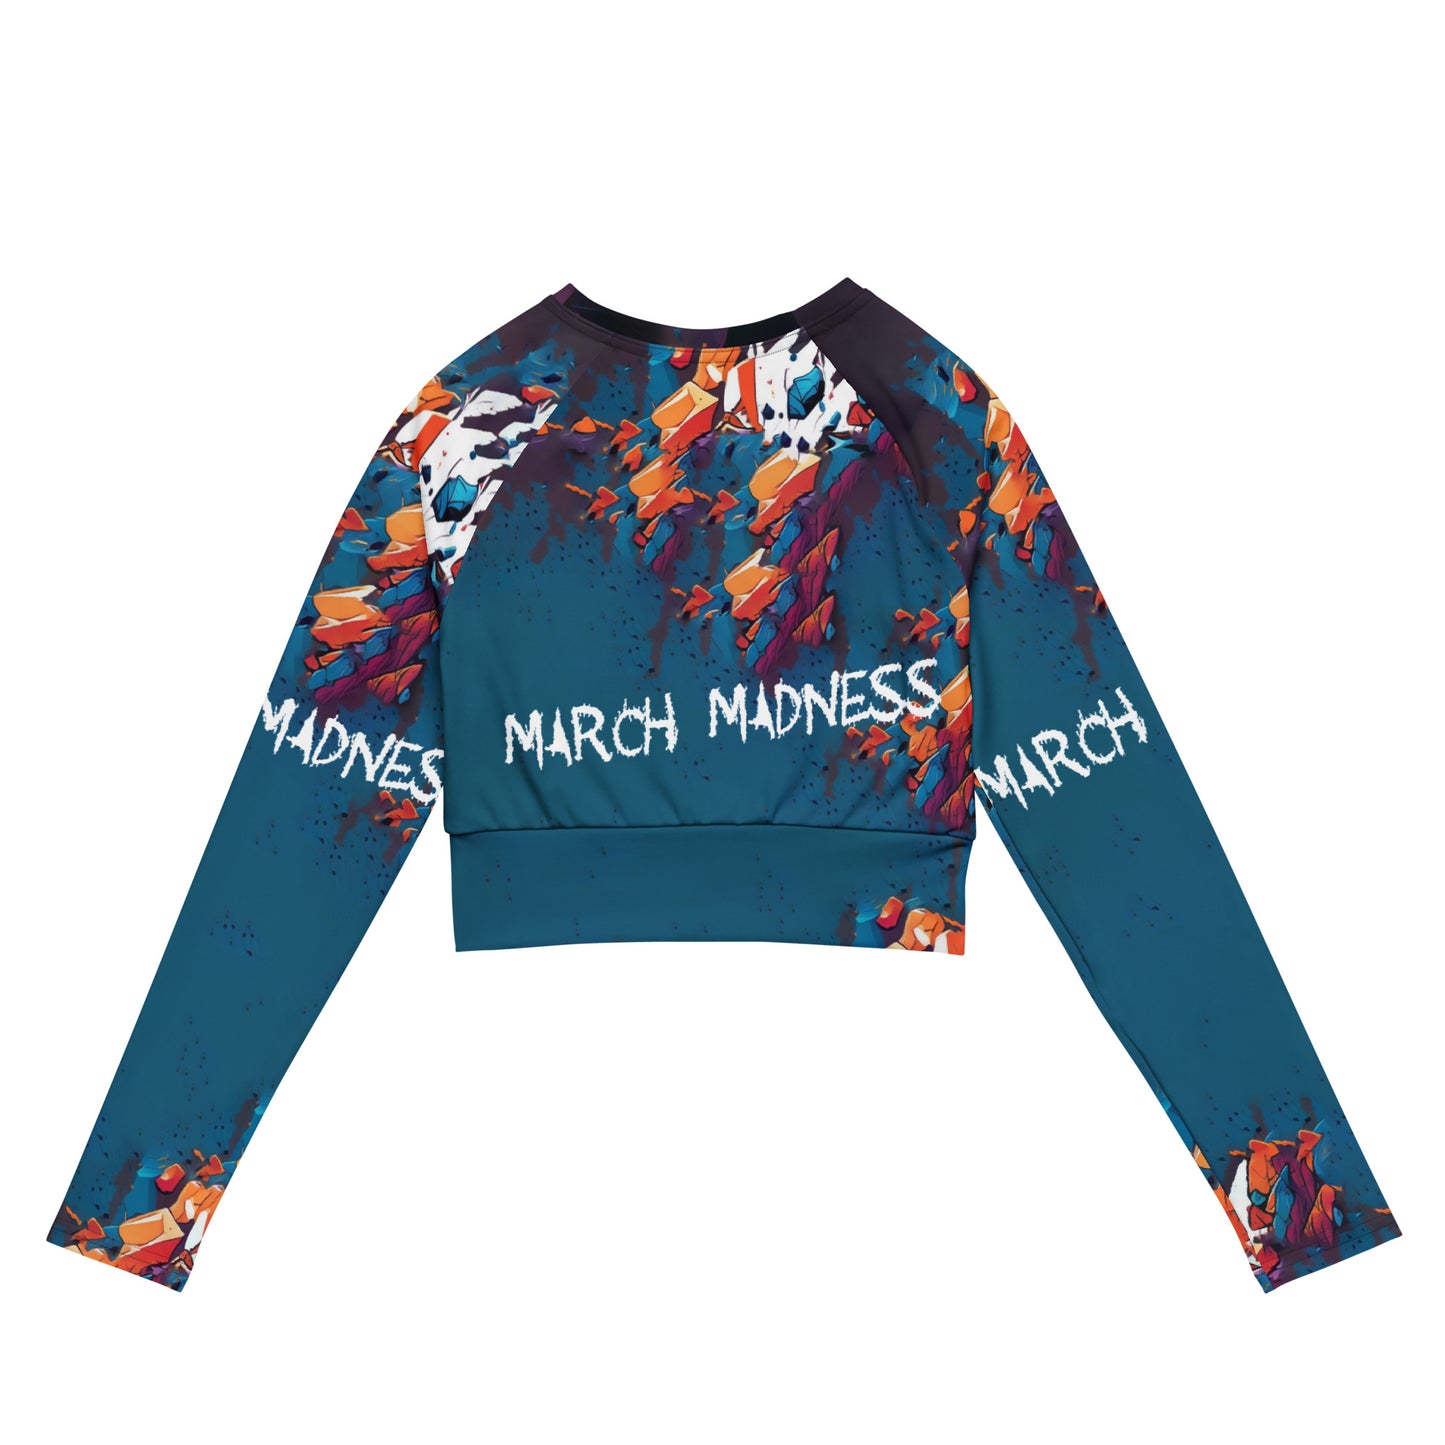 March Madness - Recycled long-sleeve crop top